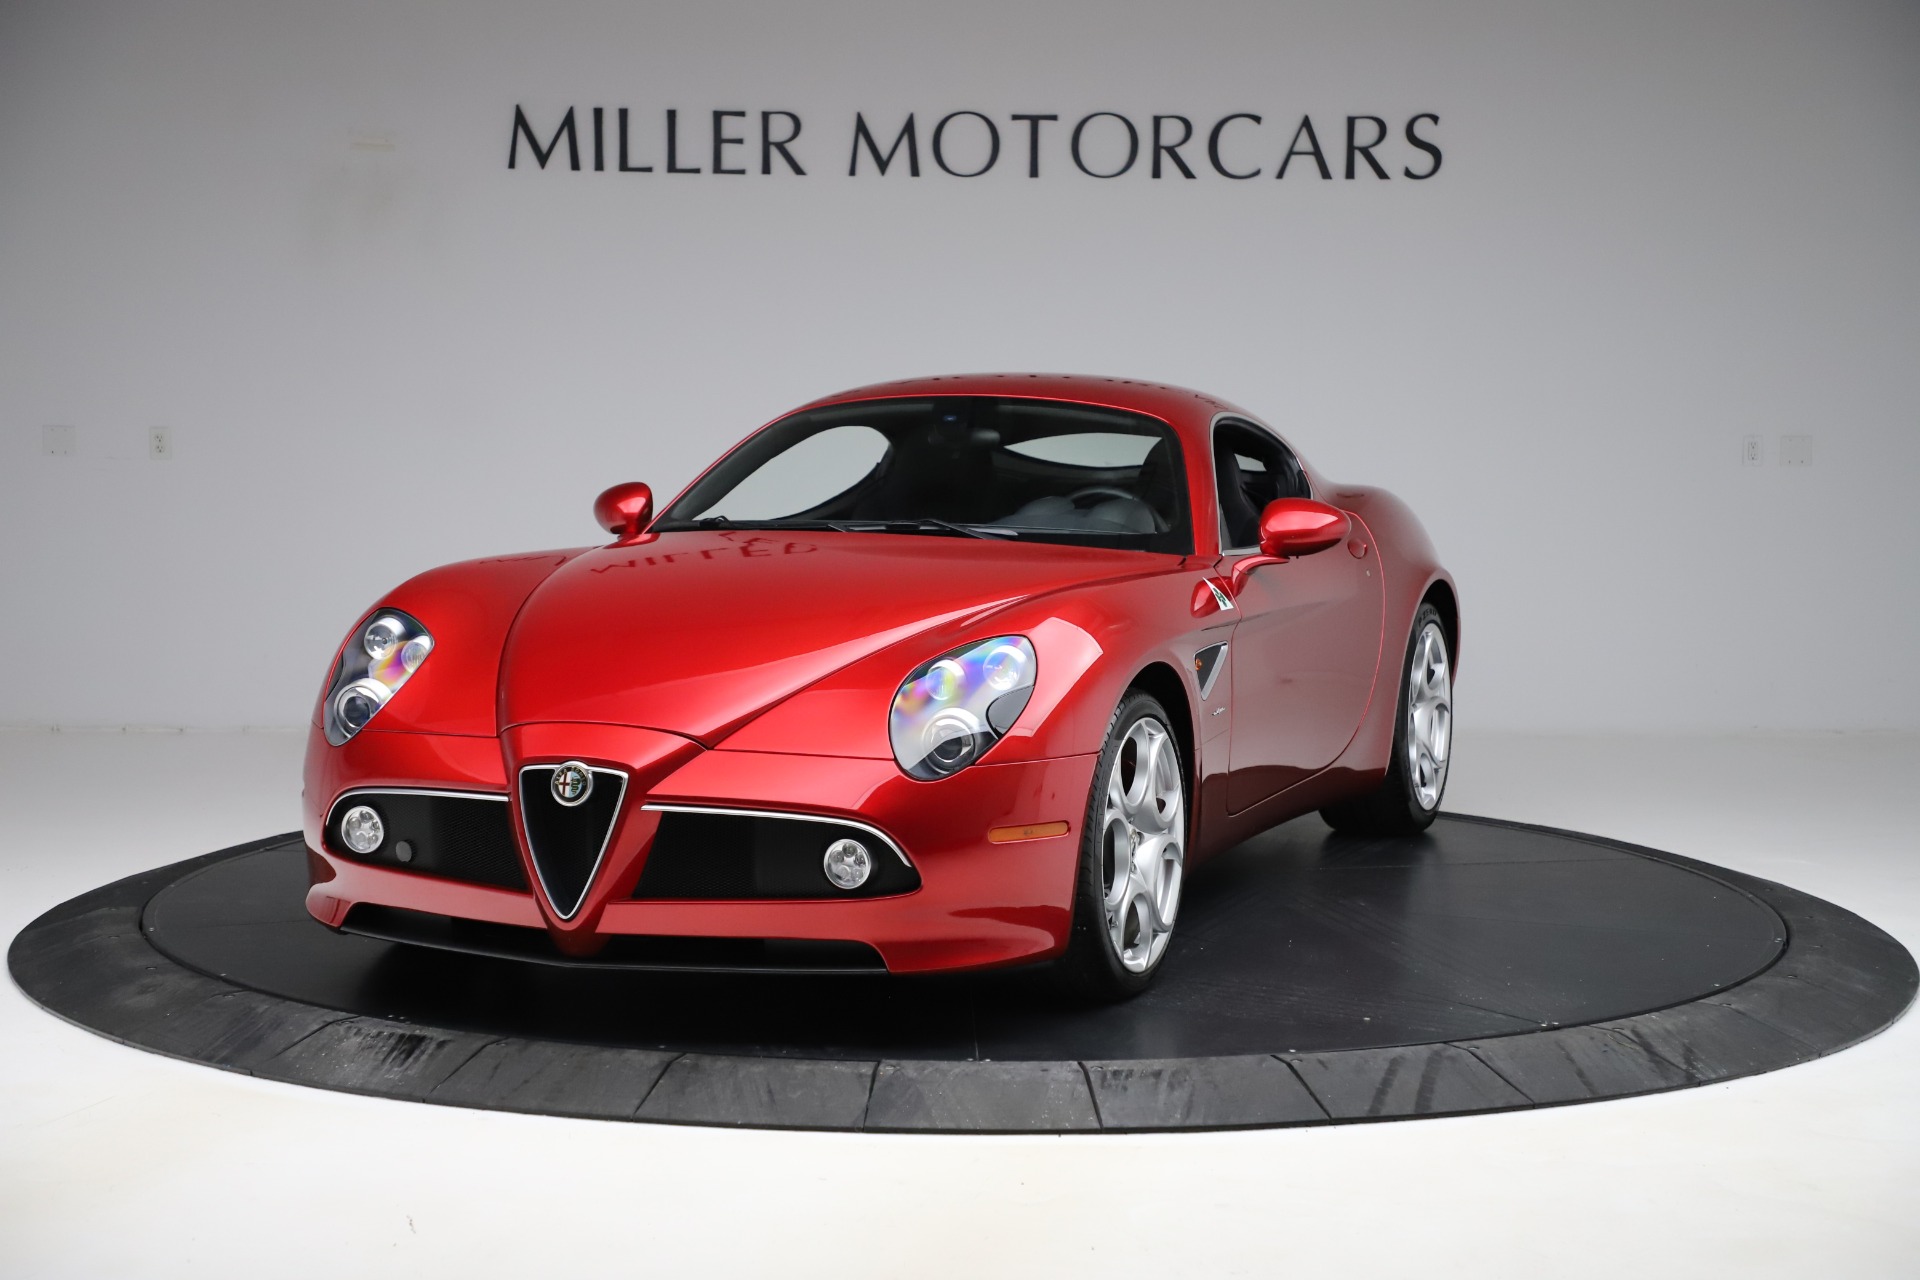 Pre Owned 2008 Alfa Romeo 8c Competizione For Sale Miller Motorcars Stock A1384a